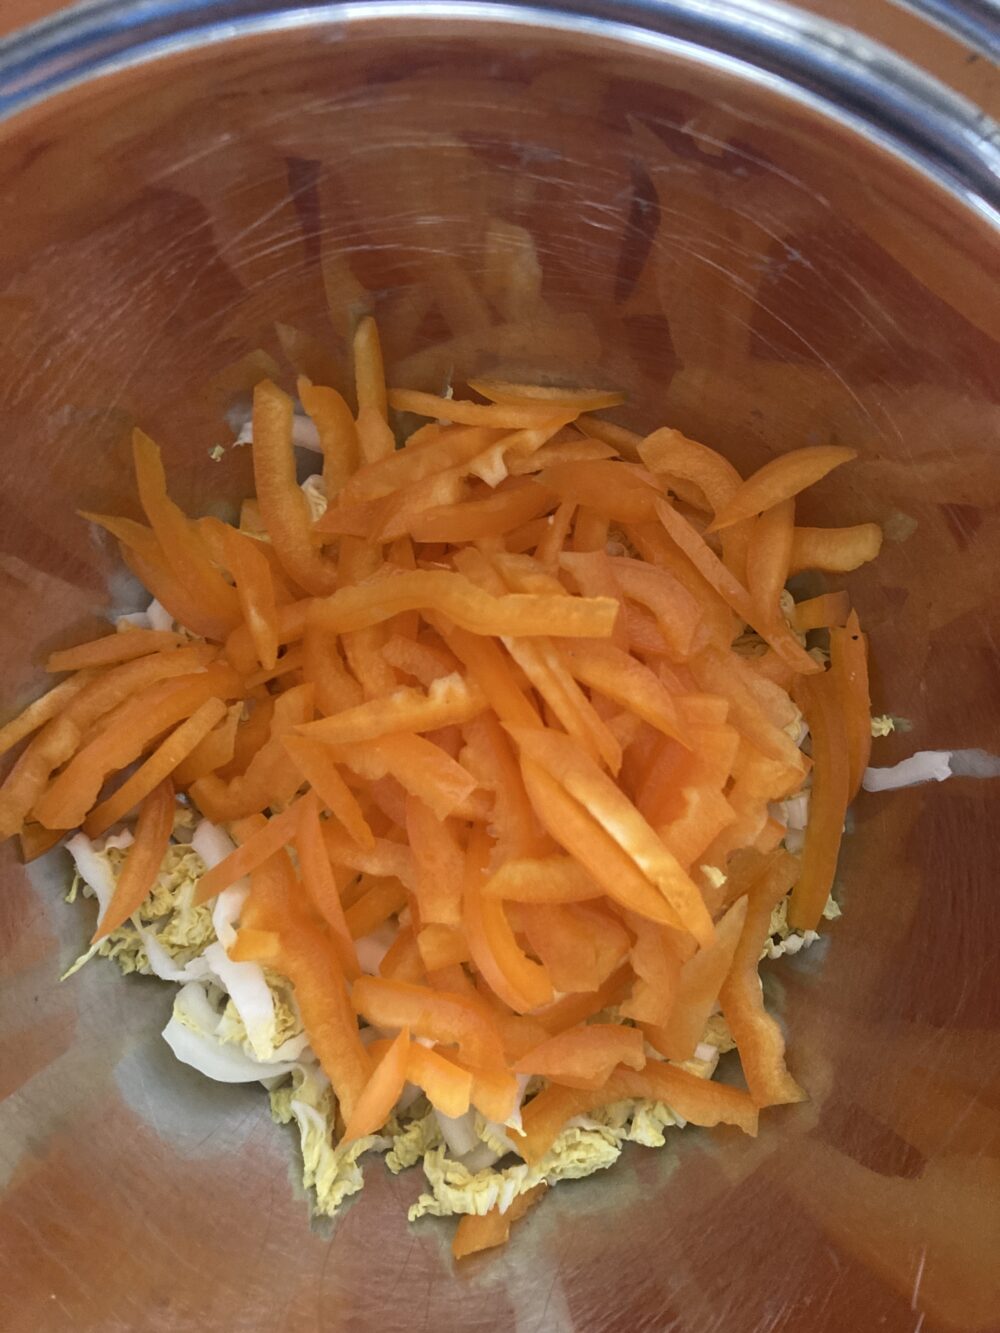 Thinly sliced orange sweet bell pepper is seen in a metal mixing bowl.